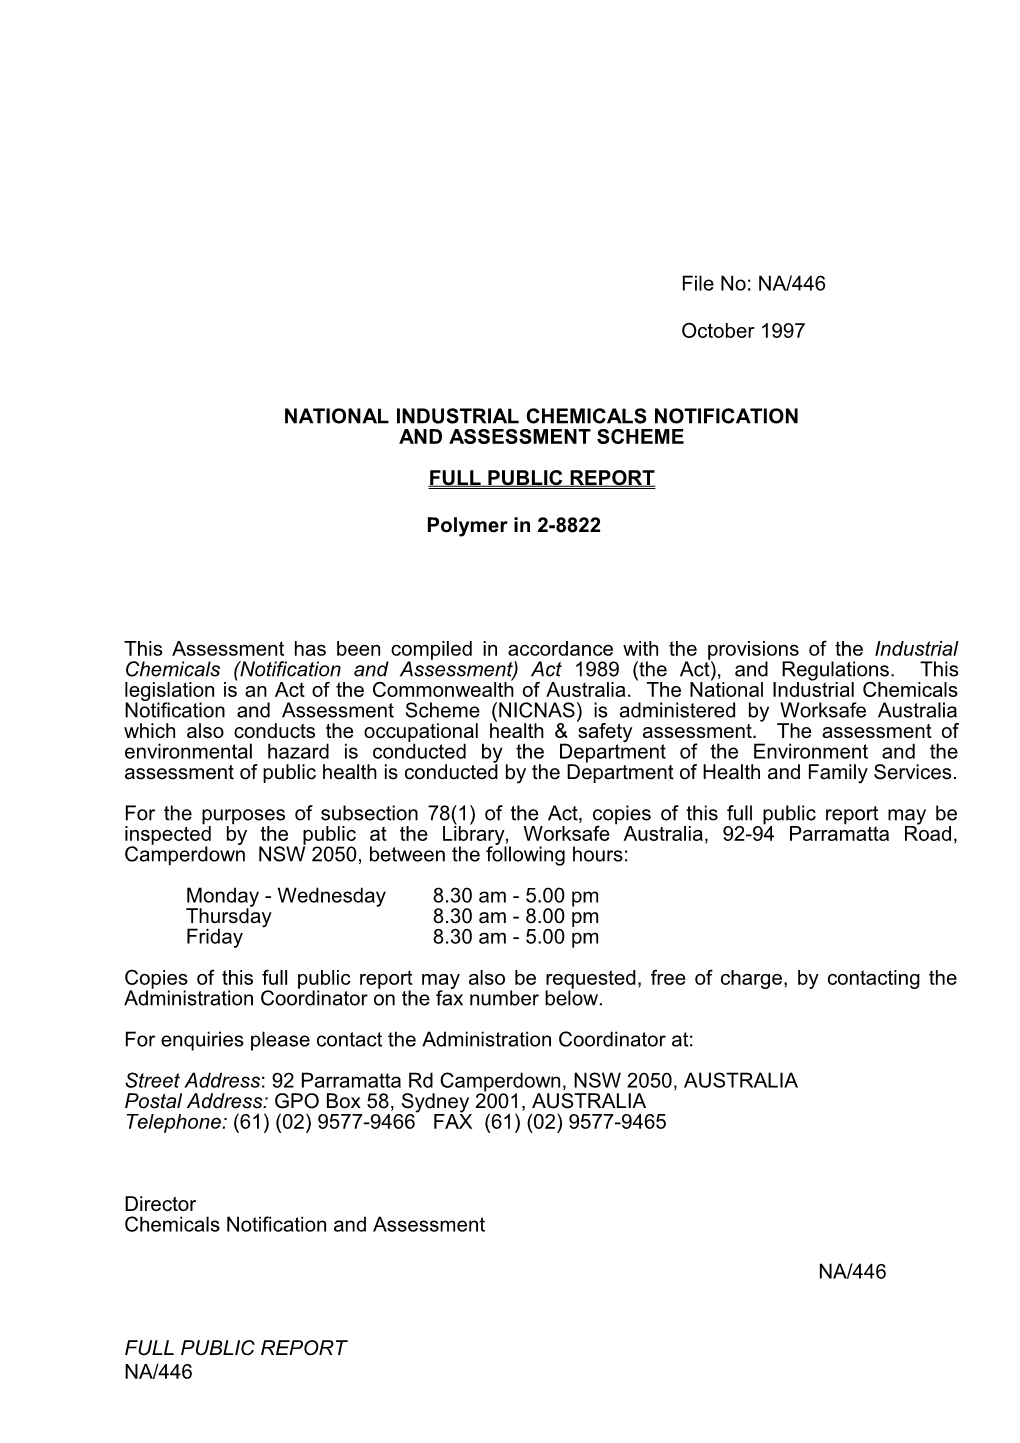 National Industrial Chemicals Notification s9